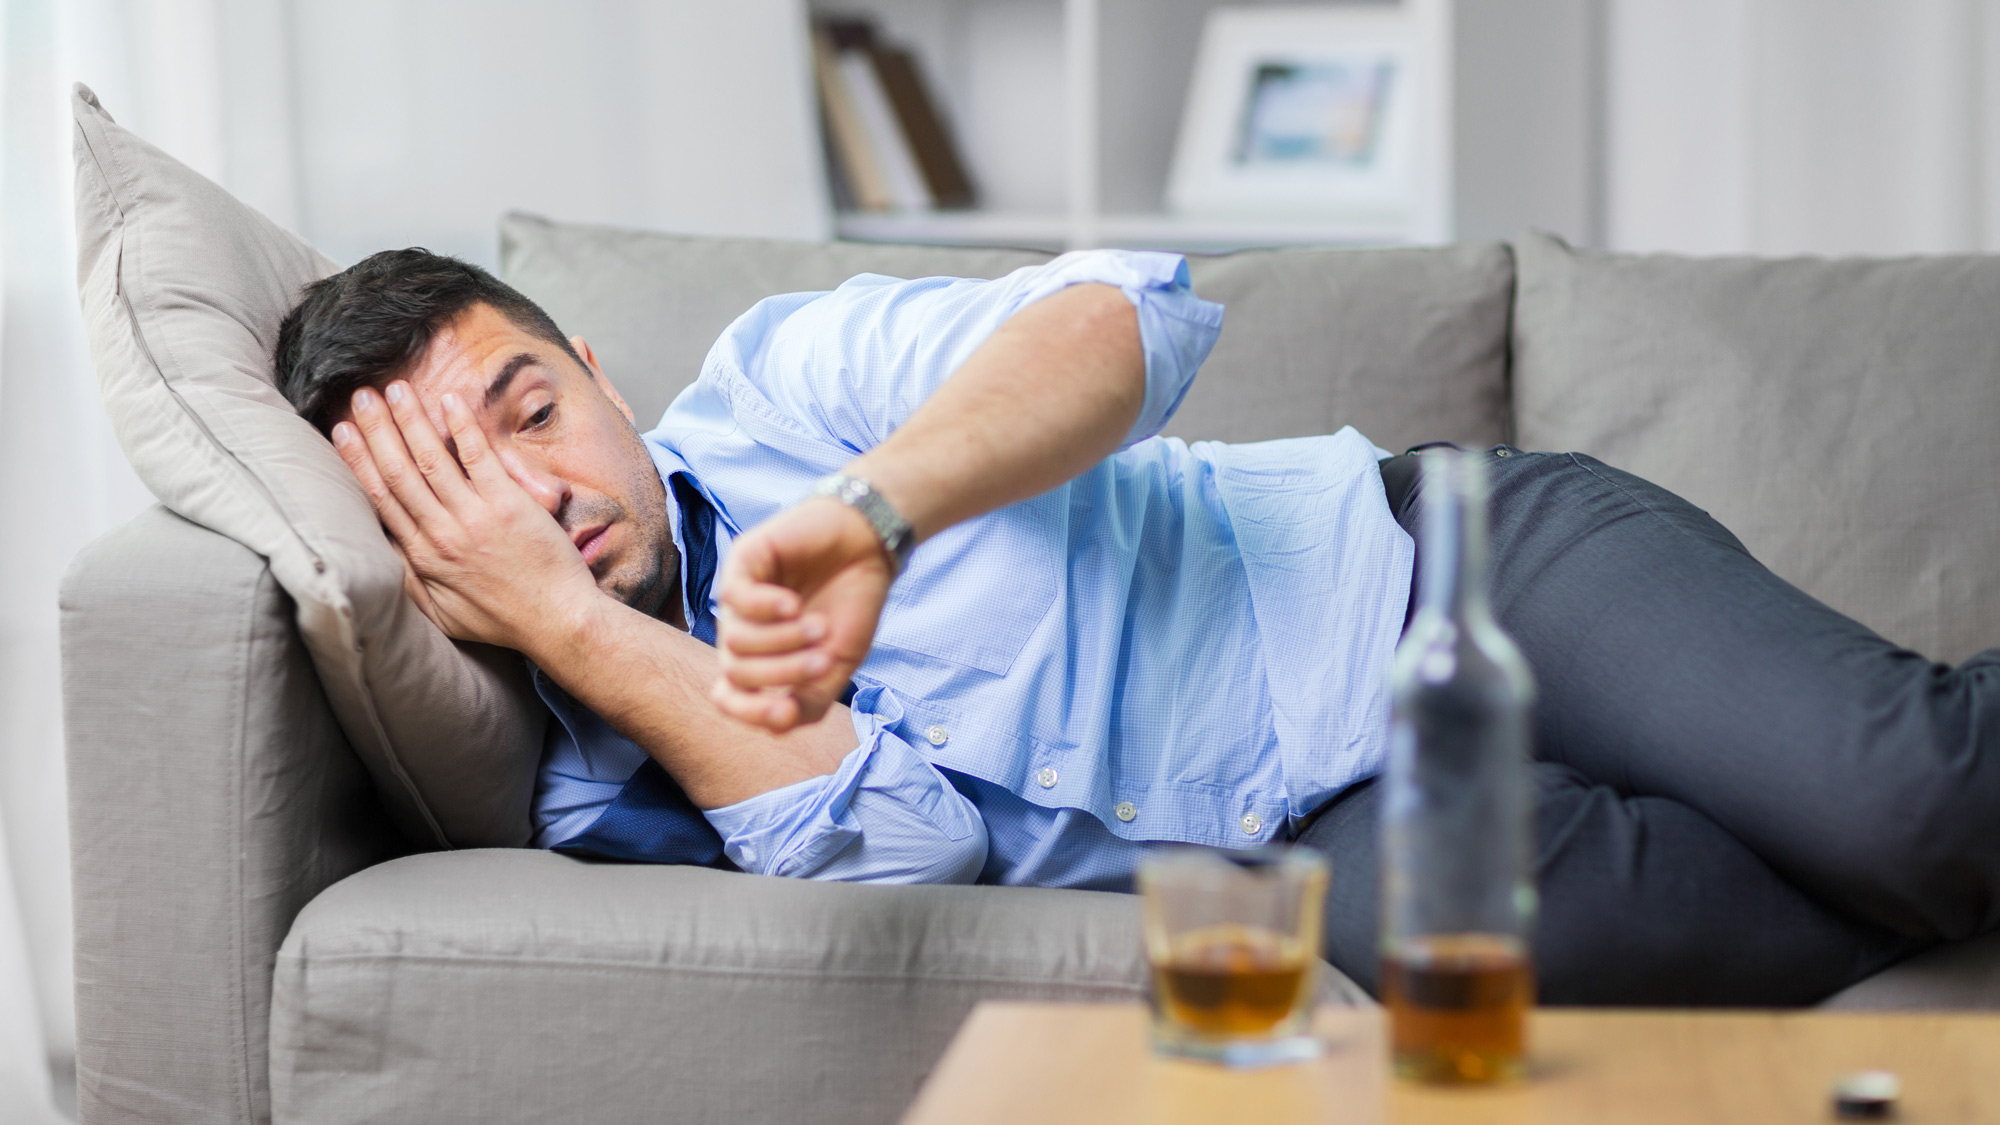 male lying on sofa and looking at wristwatch with alcohol on table